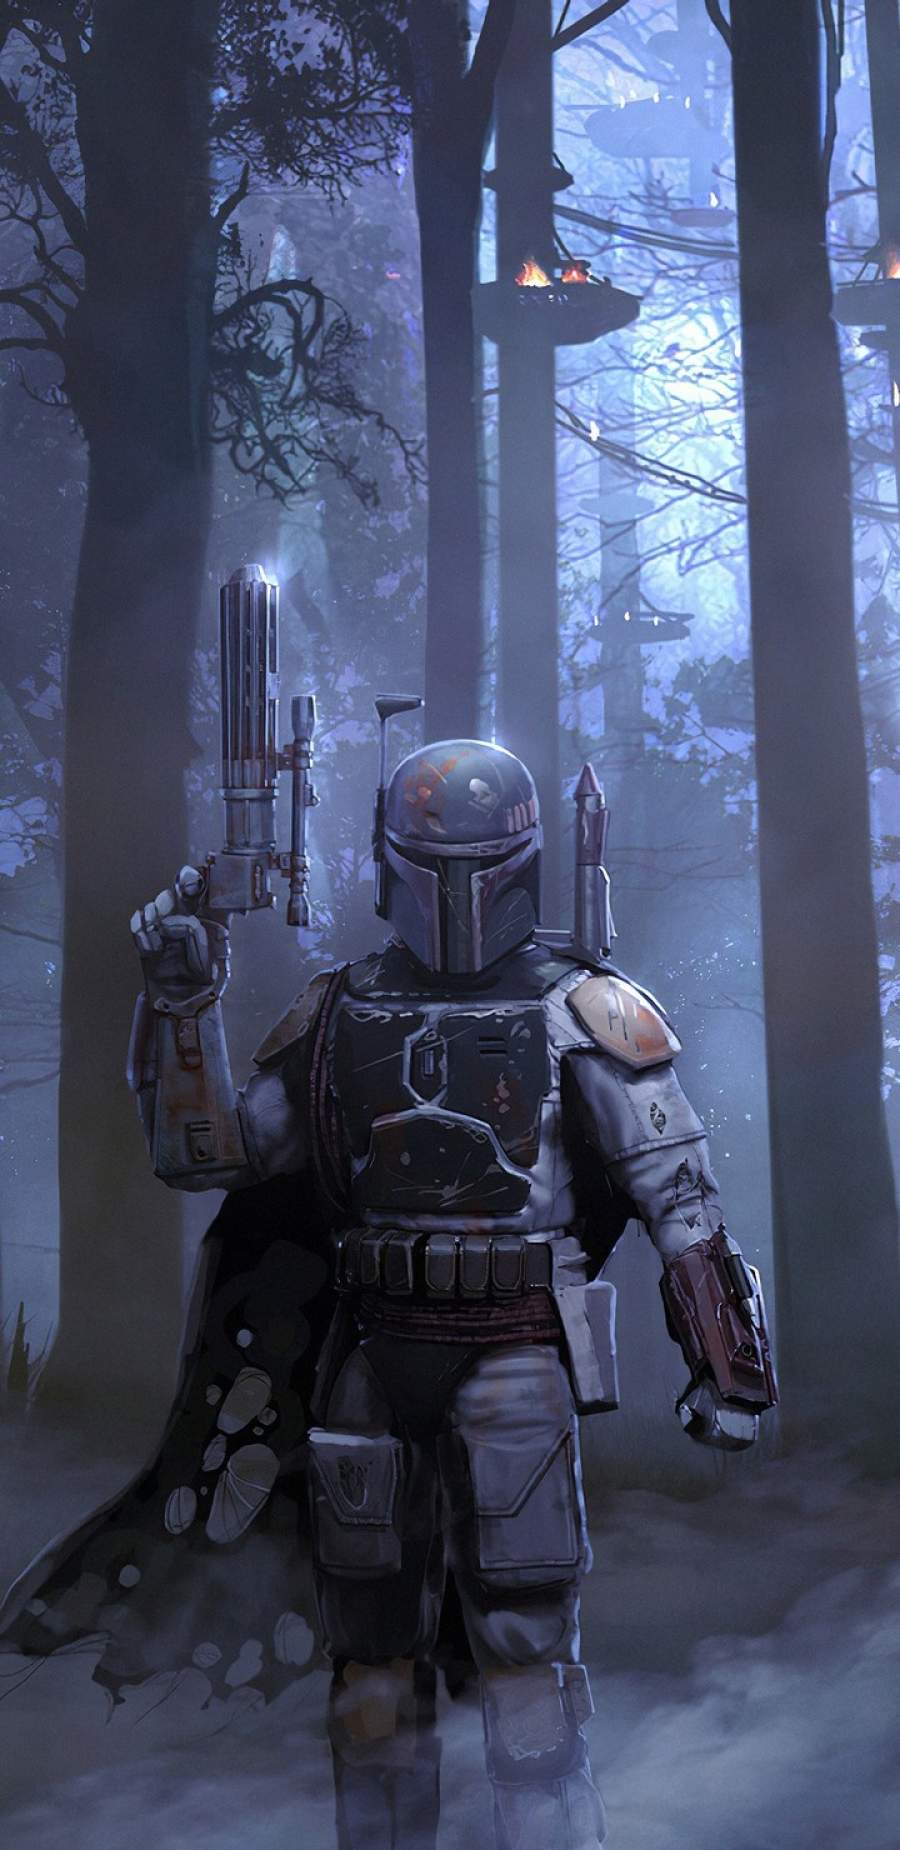 The Mandalorian wallpapers OLED iPhone screens edition